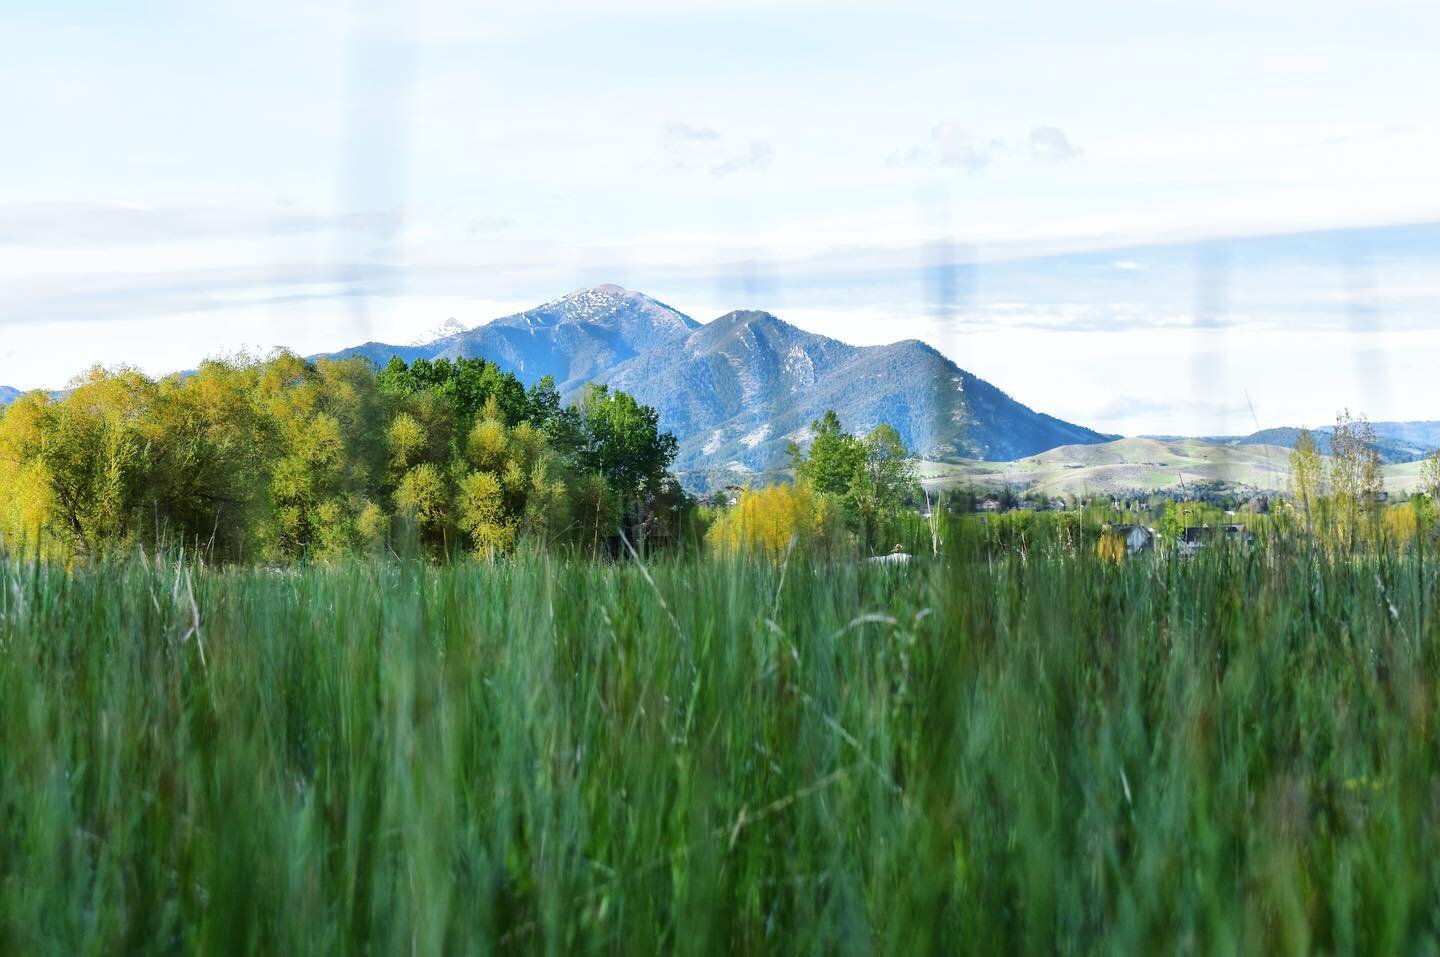 We don&rsquo;t know about you all, but we are definitely ready for some Bozeman Spring scenes like this one!
&bull;
What do you love most about springtime in Montana or wherever in the world this post finds you?
&bull;
Comment below because we&rsquo;